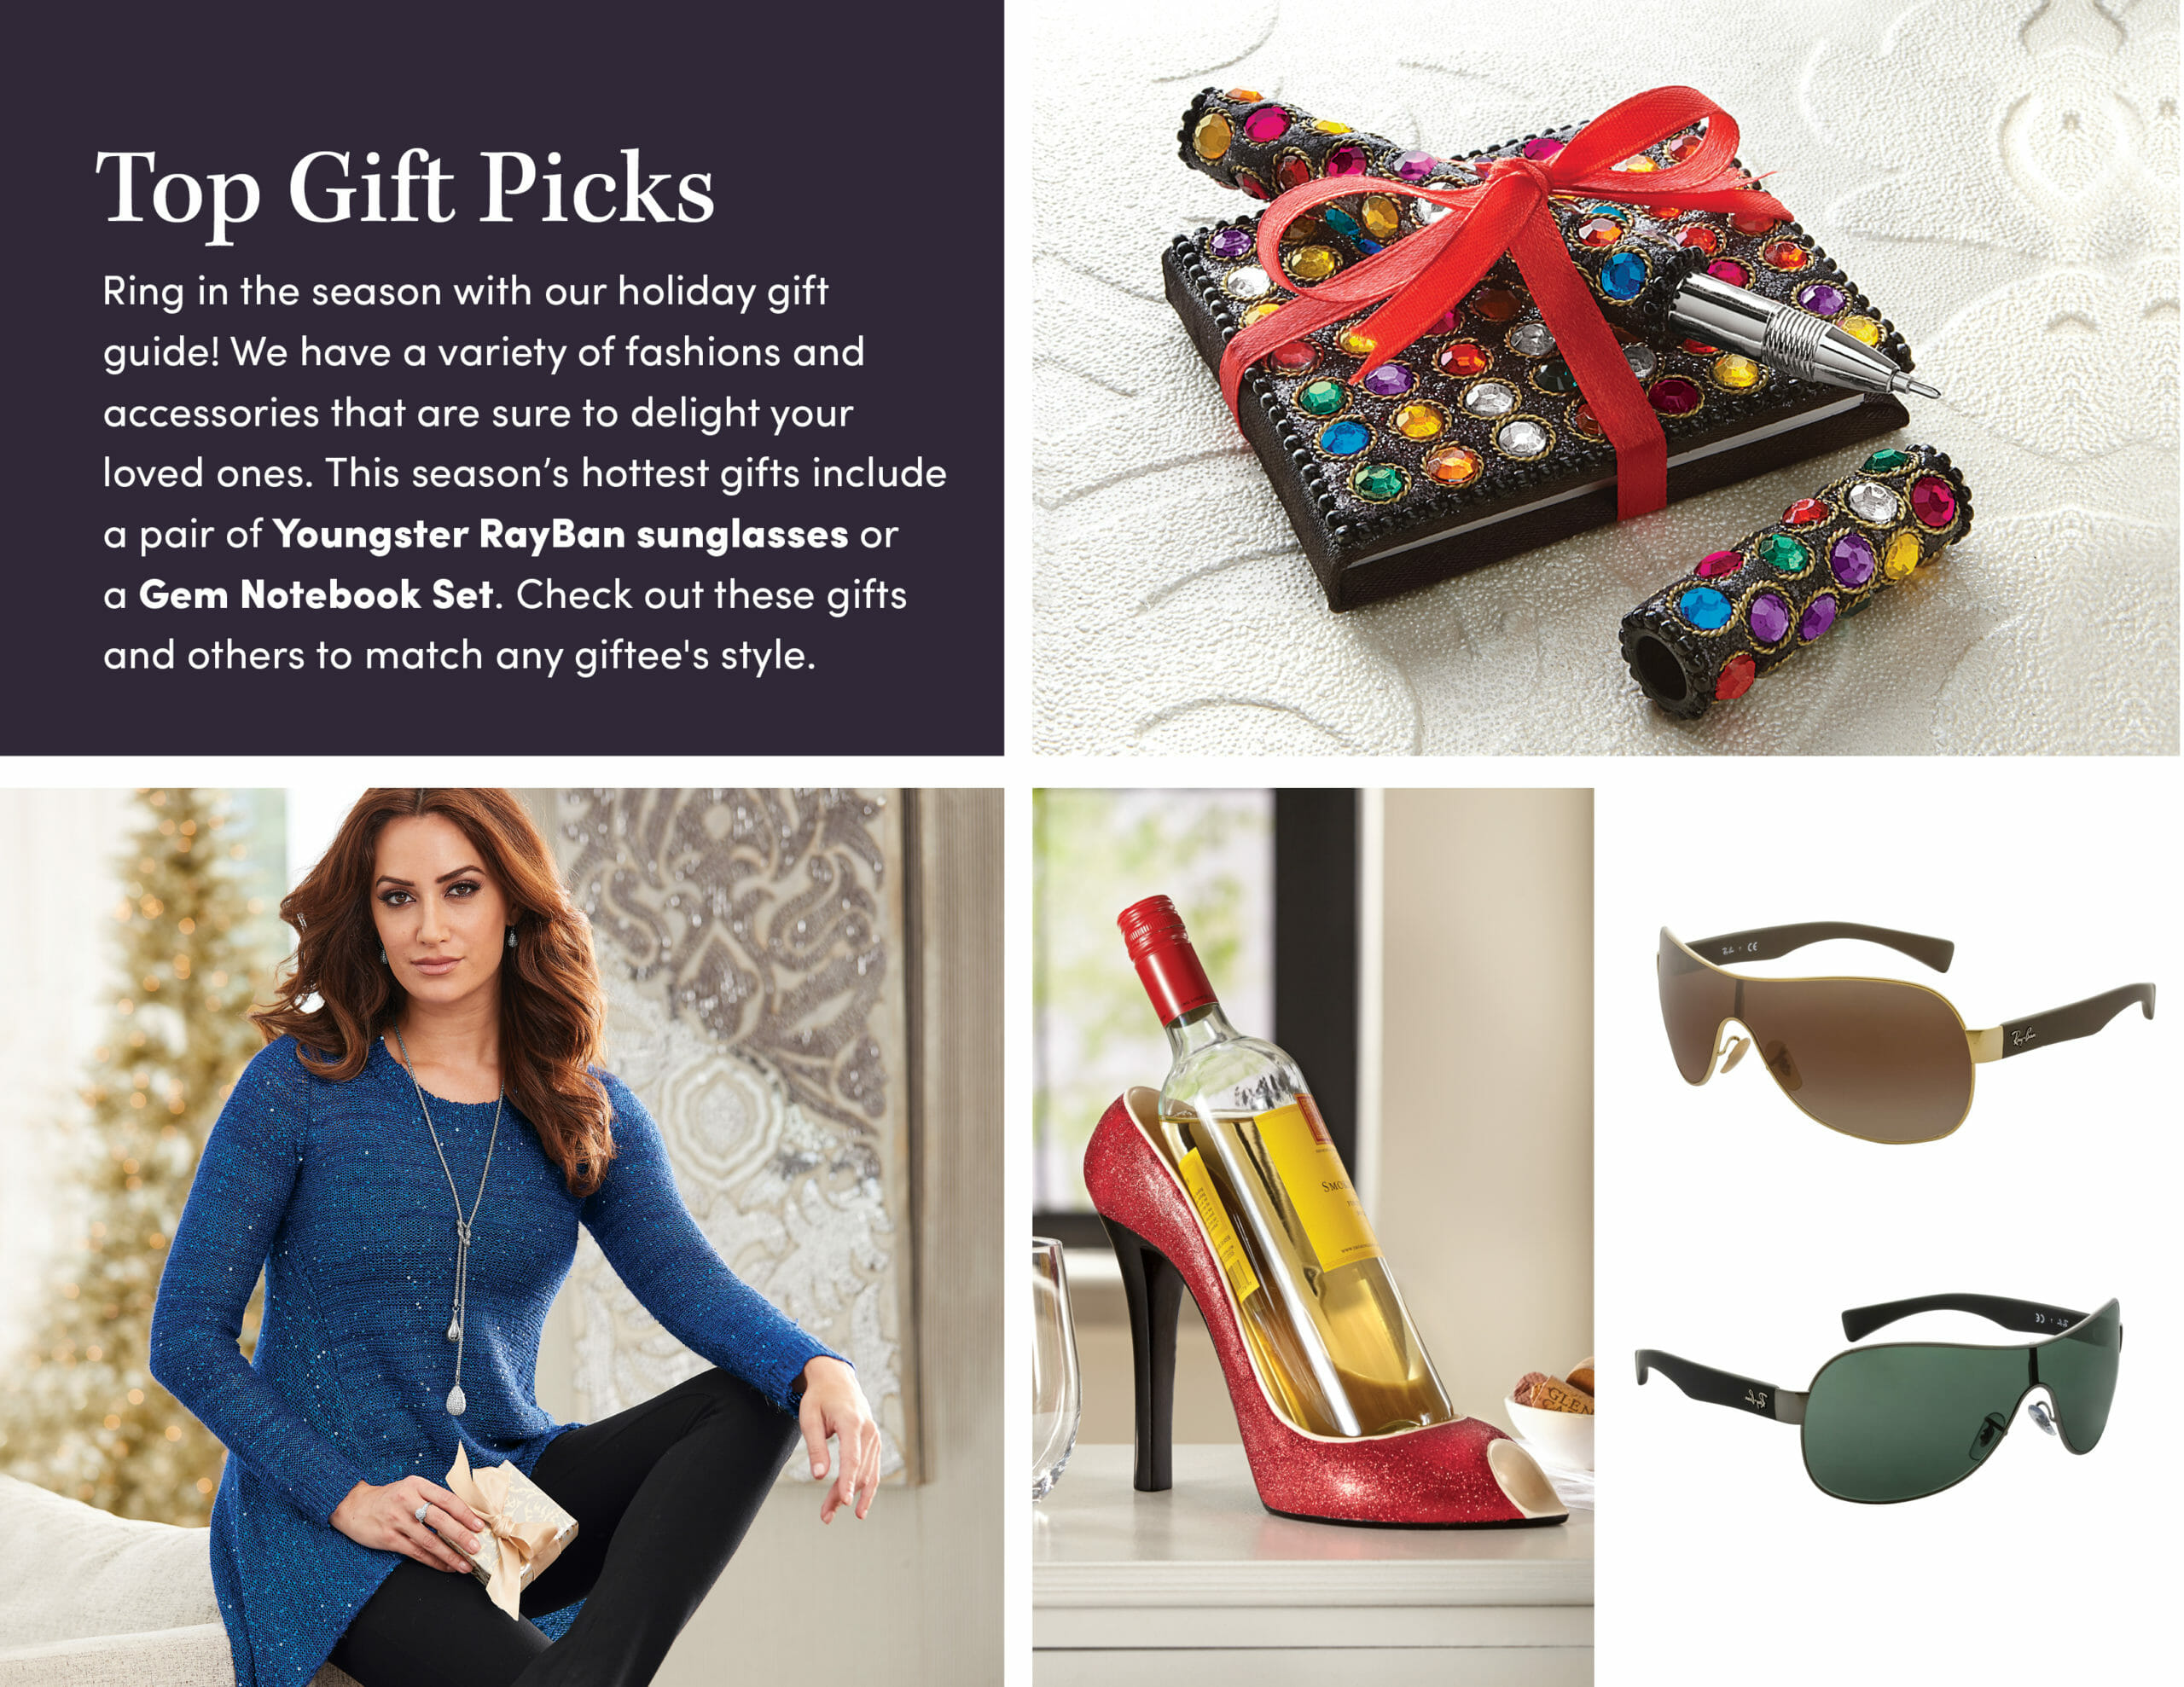 Top Gift Picks, A jeweled notebook and pen set, a woman in a blue sweater, a stiletto holding a wine bottle, sunglasses.